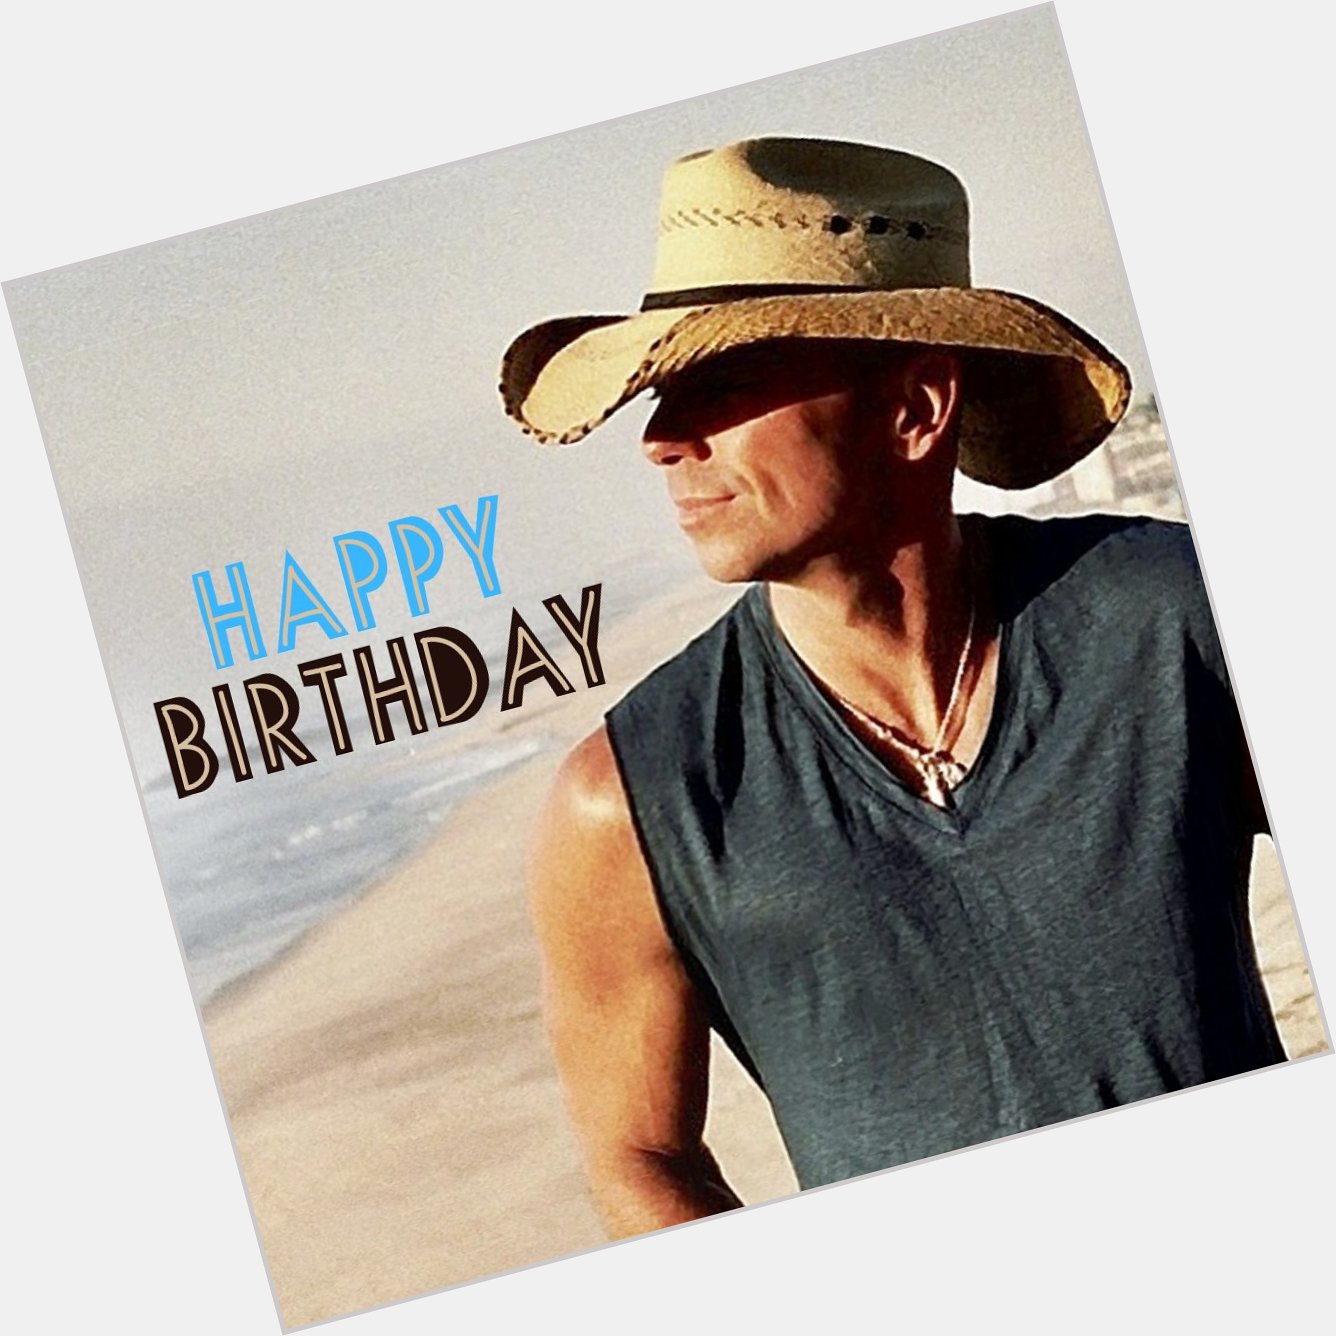 HAPPY BIRTHDAY to   What\s your favorite Kenny Chesney song? 